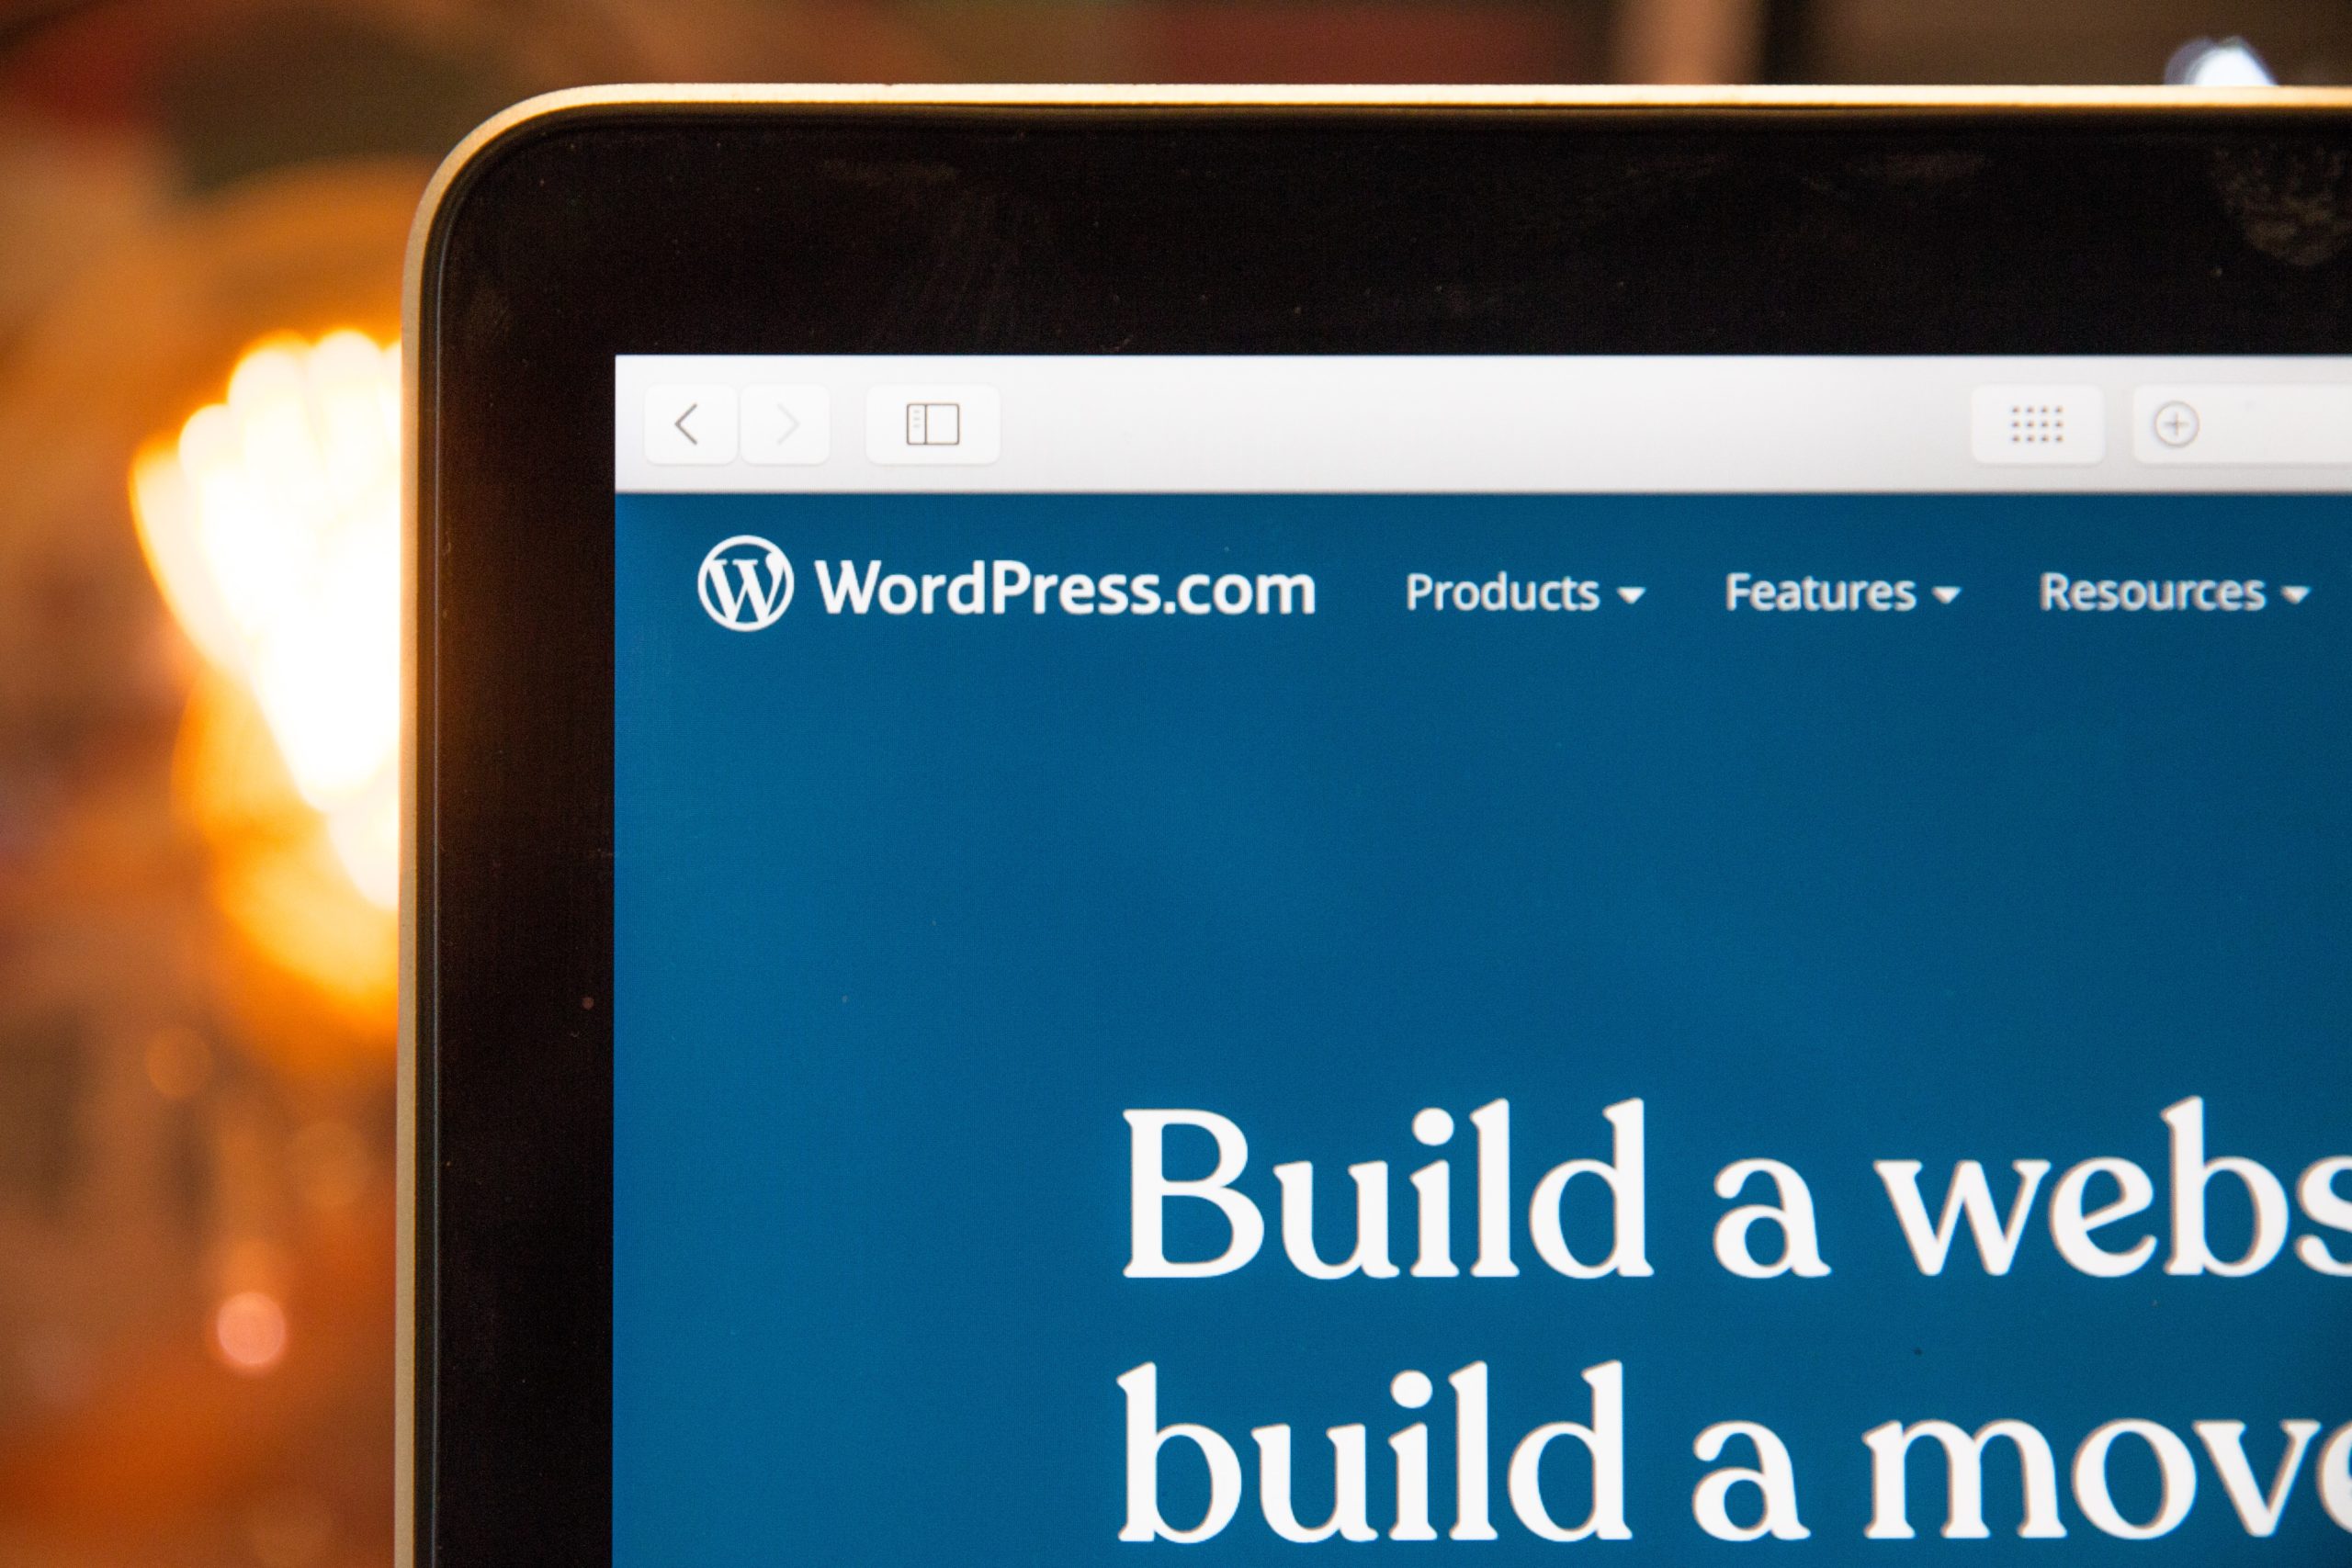 Automatizes the WordPress site and improves workflow